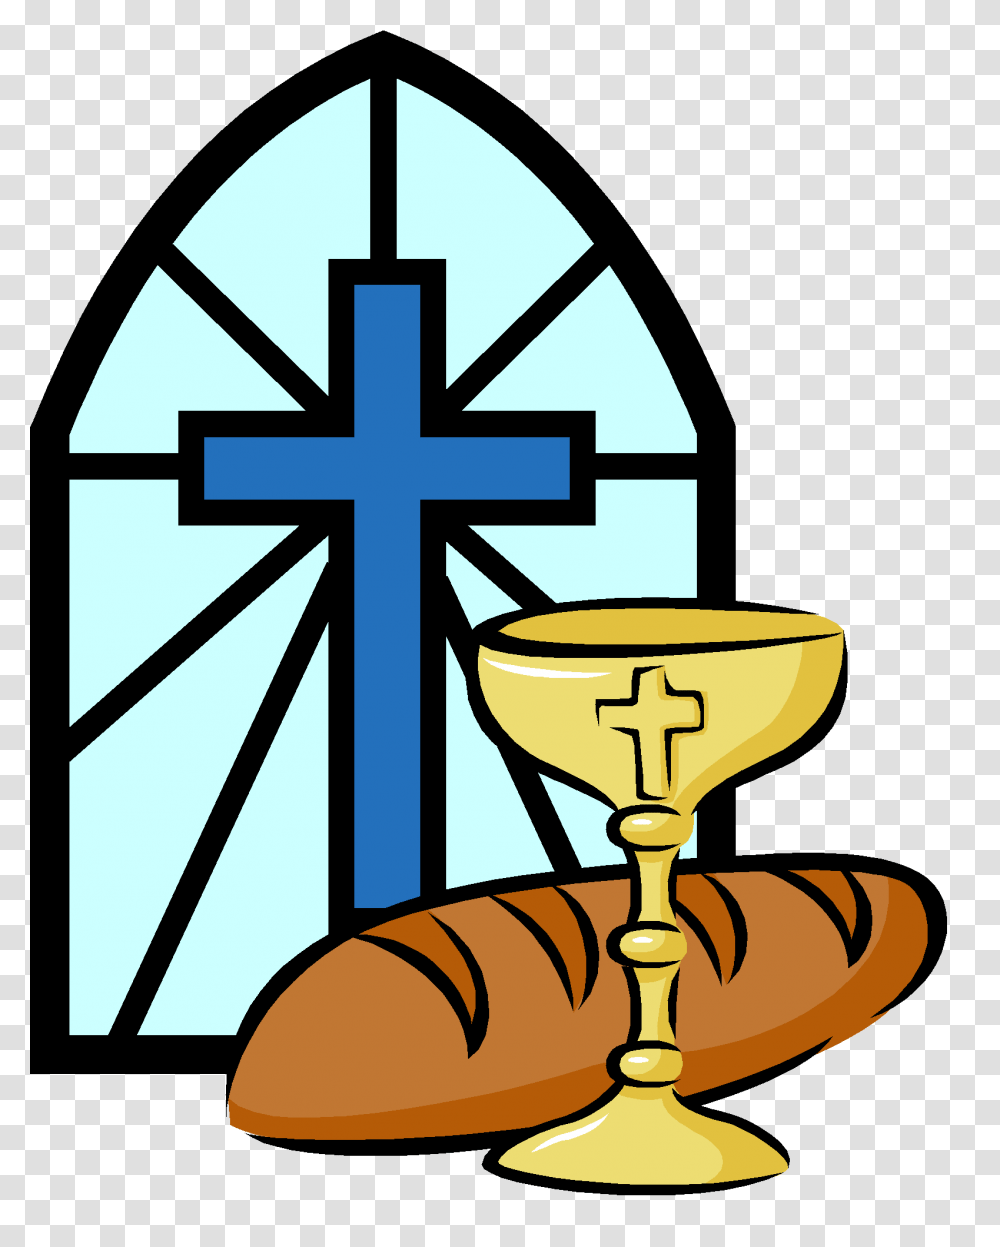 Holy Communion Bread And Wine Ministers The Eucharist Free Image, Cross, Glass, Hourglass Transparent Png